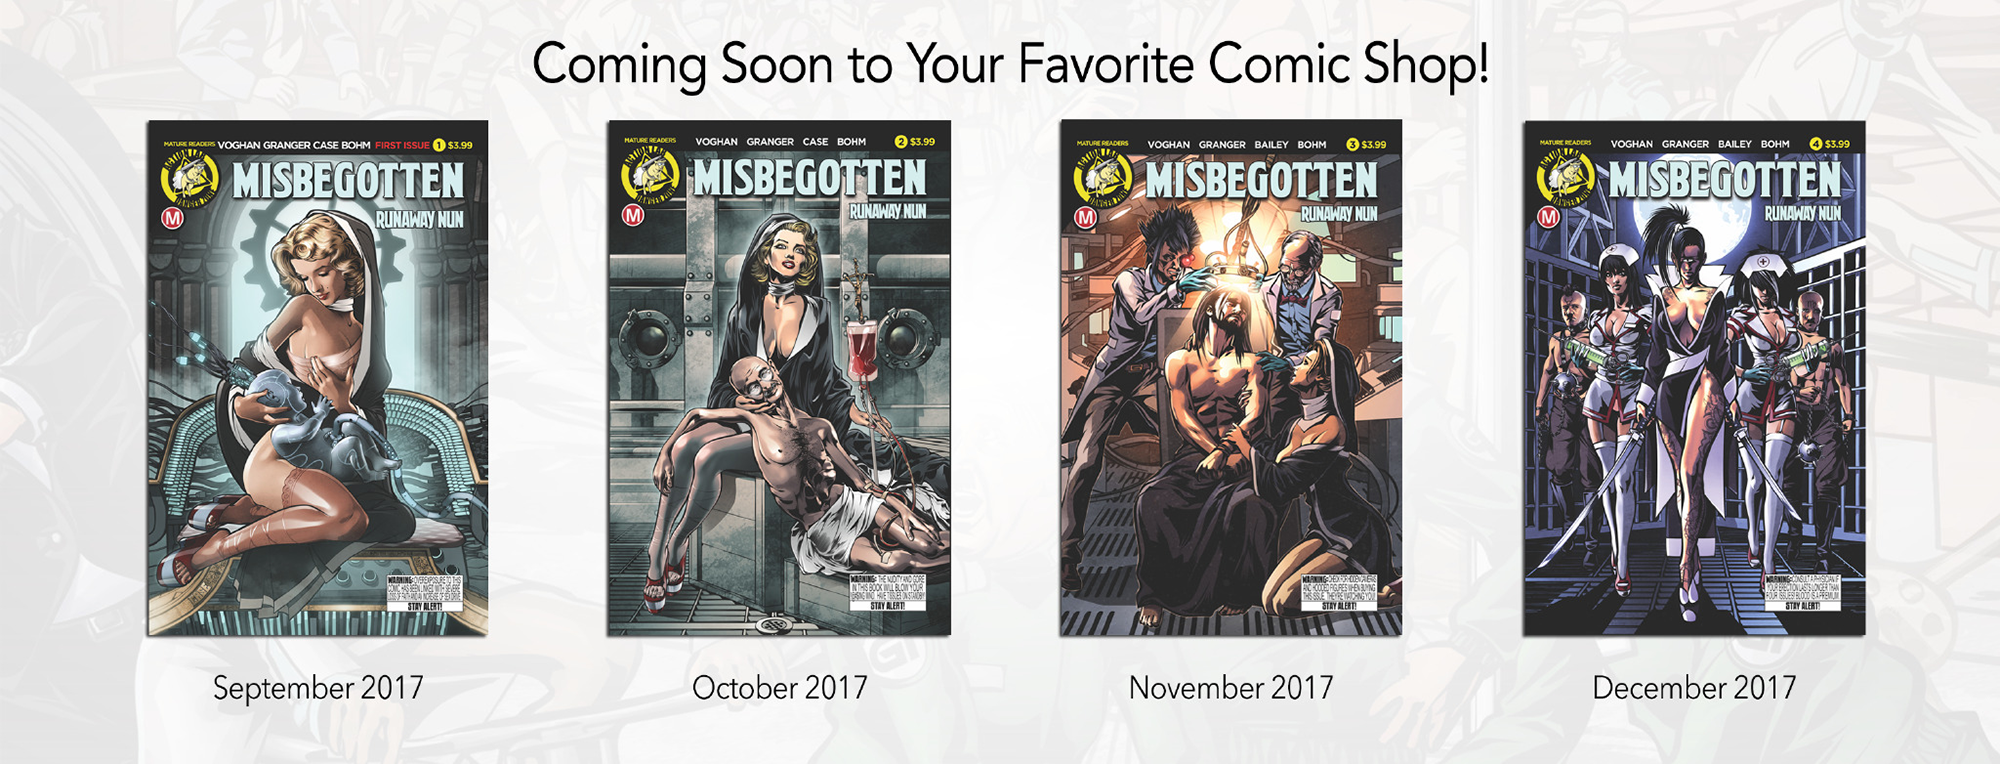 Coming soon to your favorite comic shop-shows four covers to Misbegotten comics